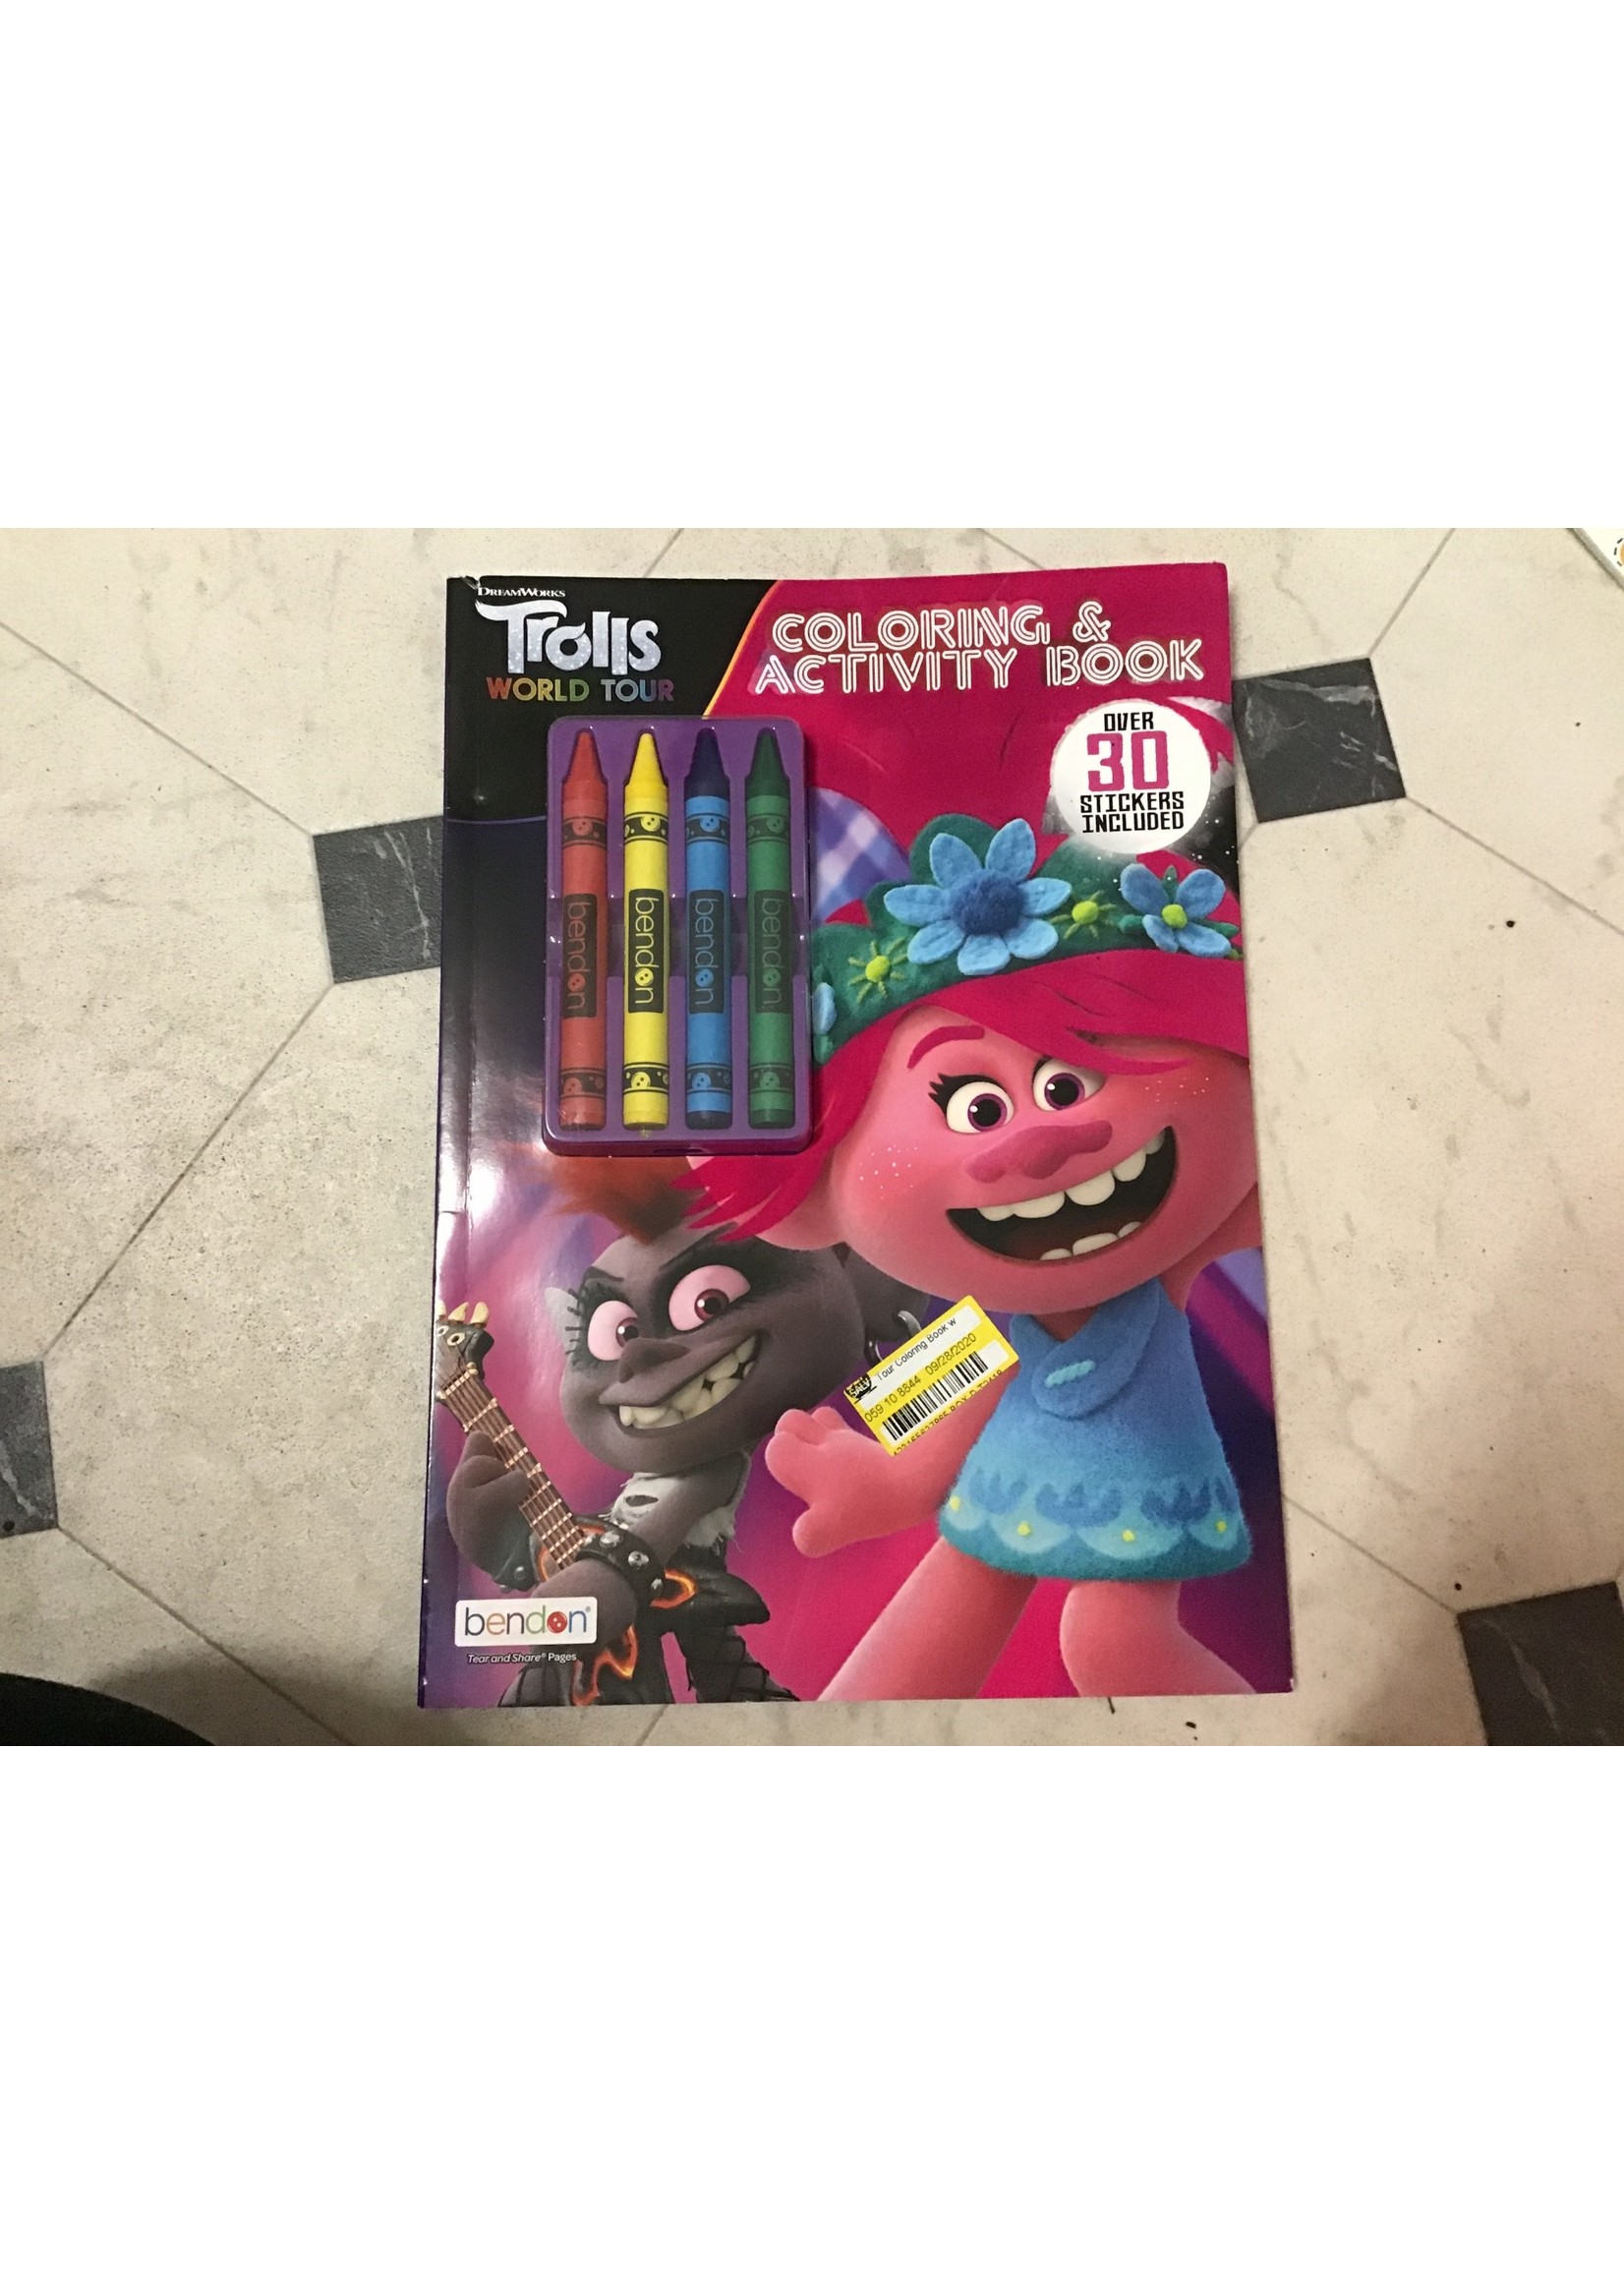 Trolls World Tour Coloring Book With Crayons - Target Exclusive Edition